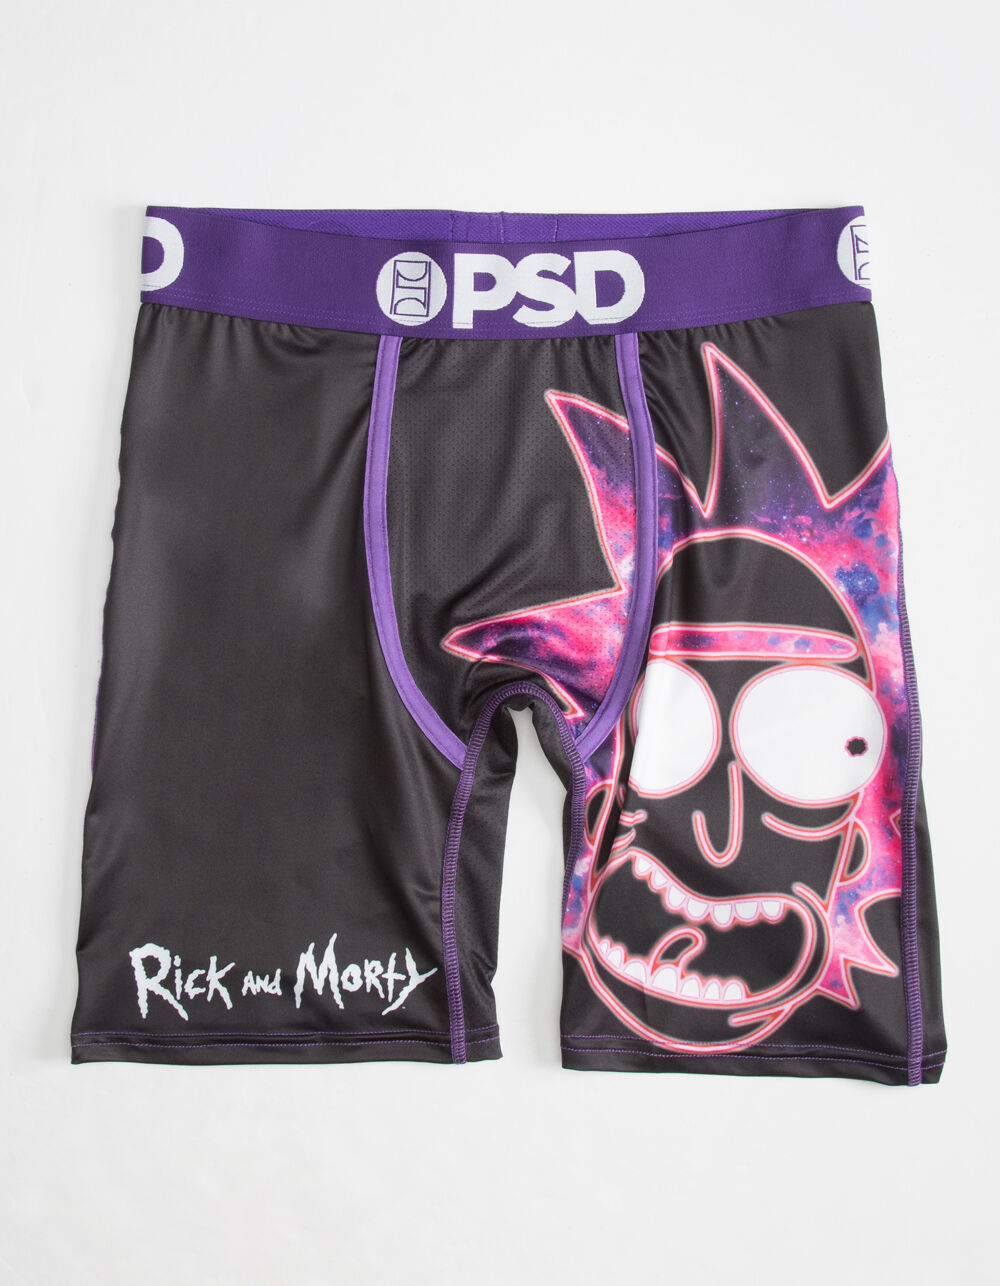 PSD Men's Rick and Morty Boxer Briefs